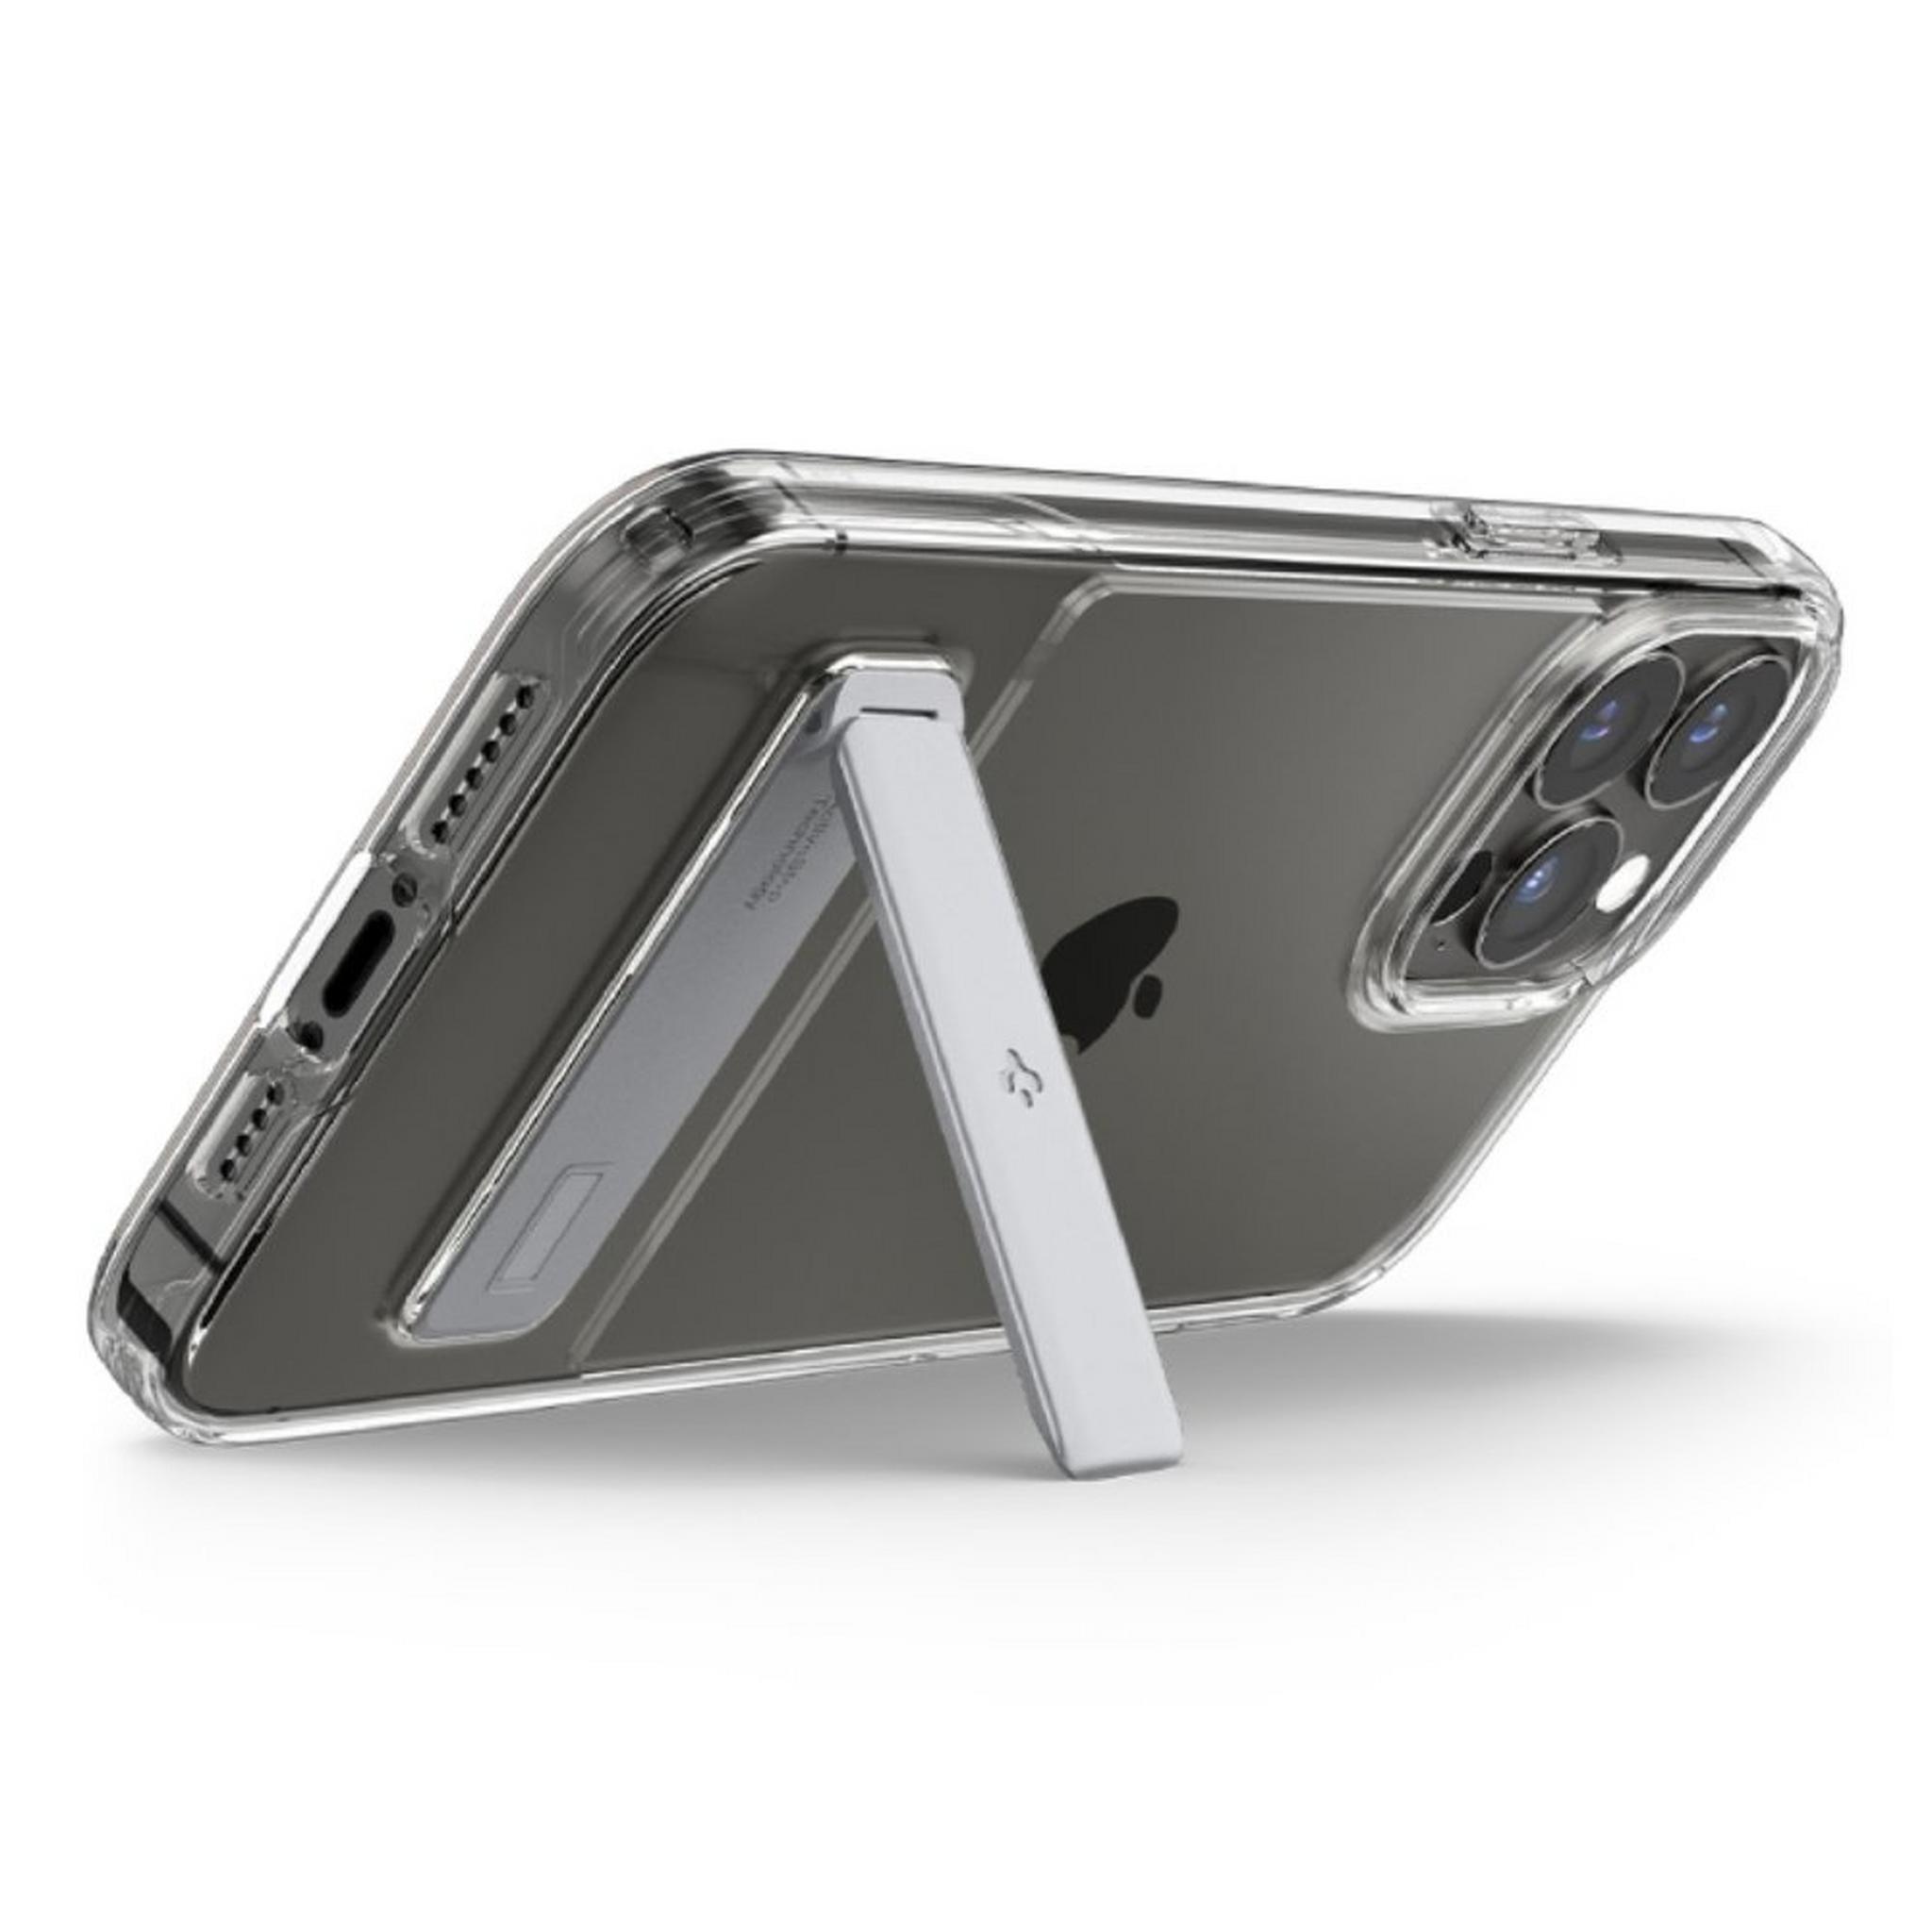 Spigen Slim Armor Case w/Stand for iPhone 13 Pro - Clear